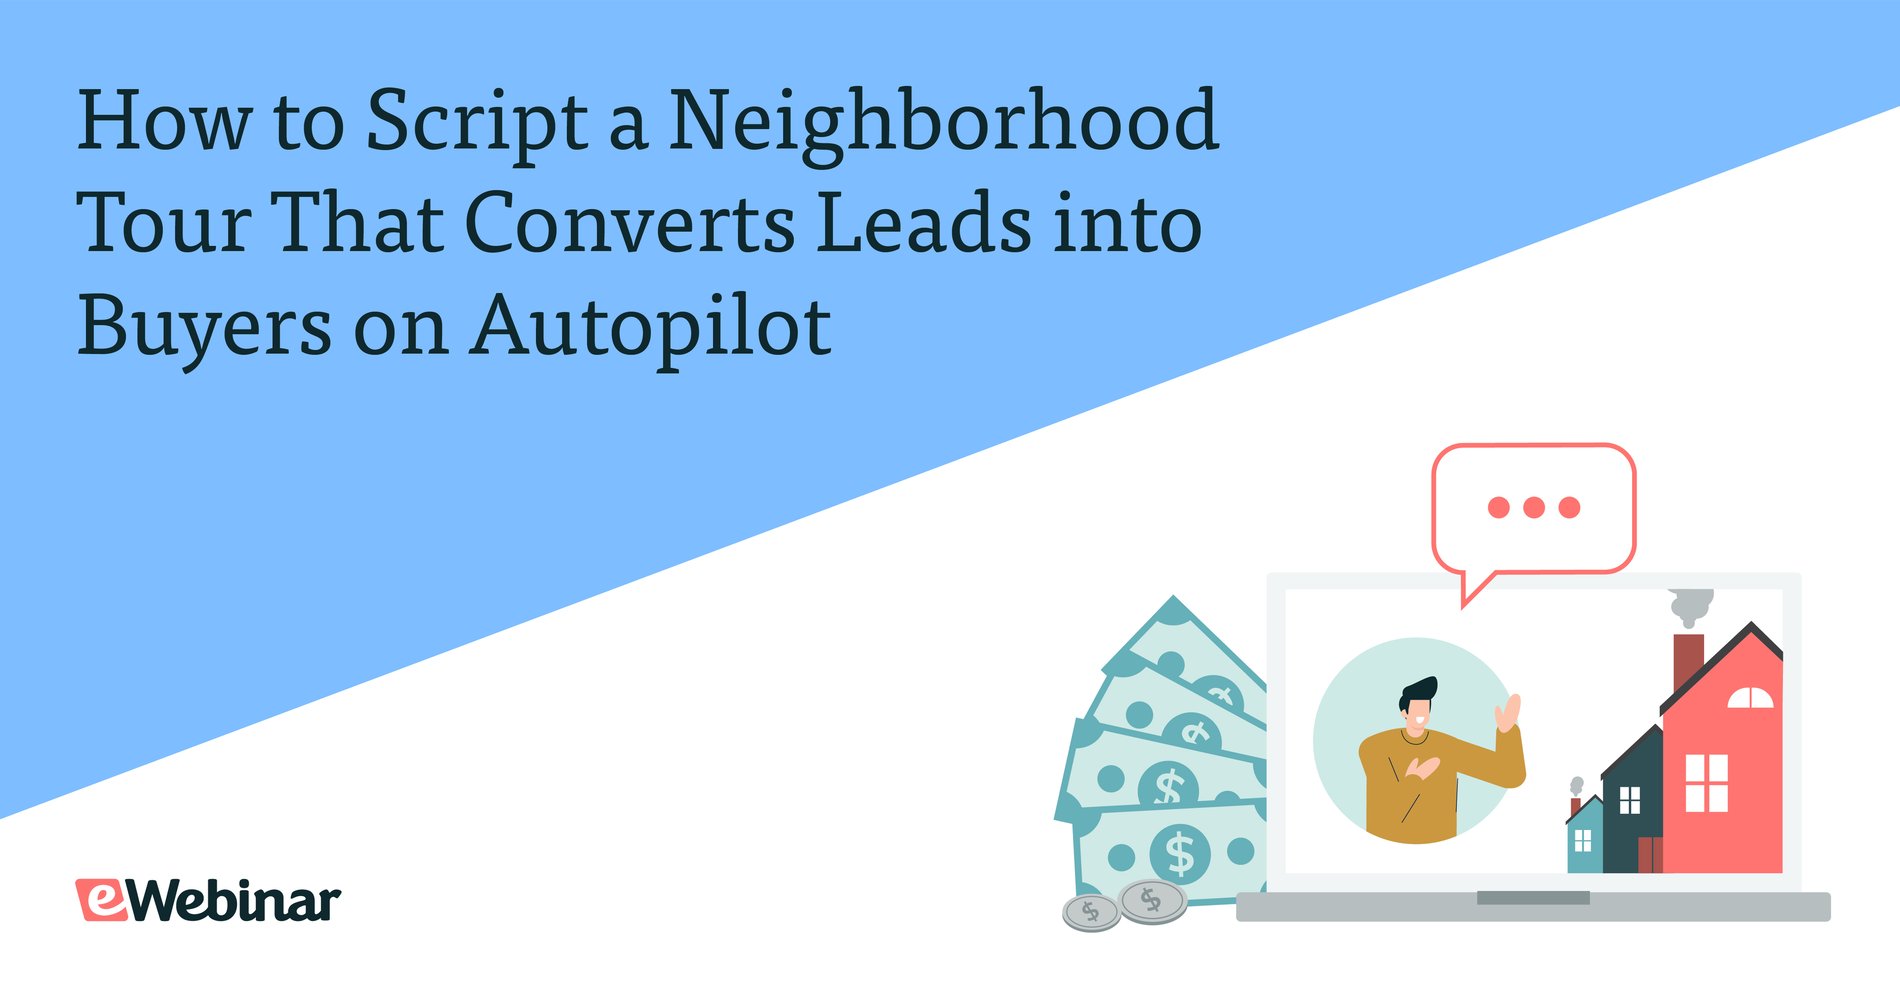 How to Script a Neighborhood Tour That Converts Leads into Buyers on Autopilot